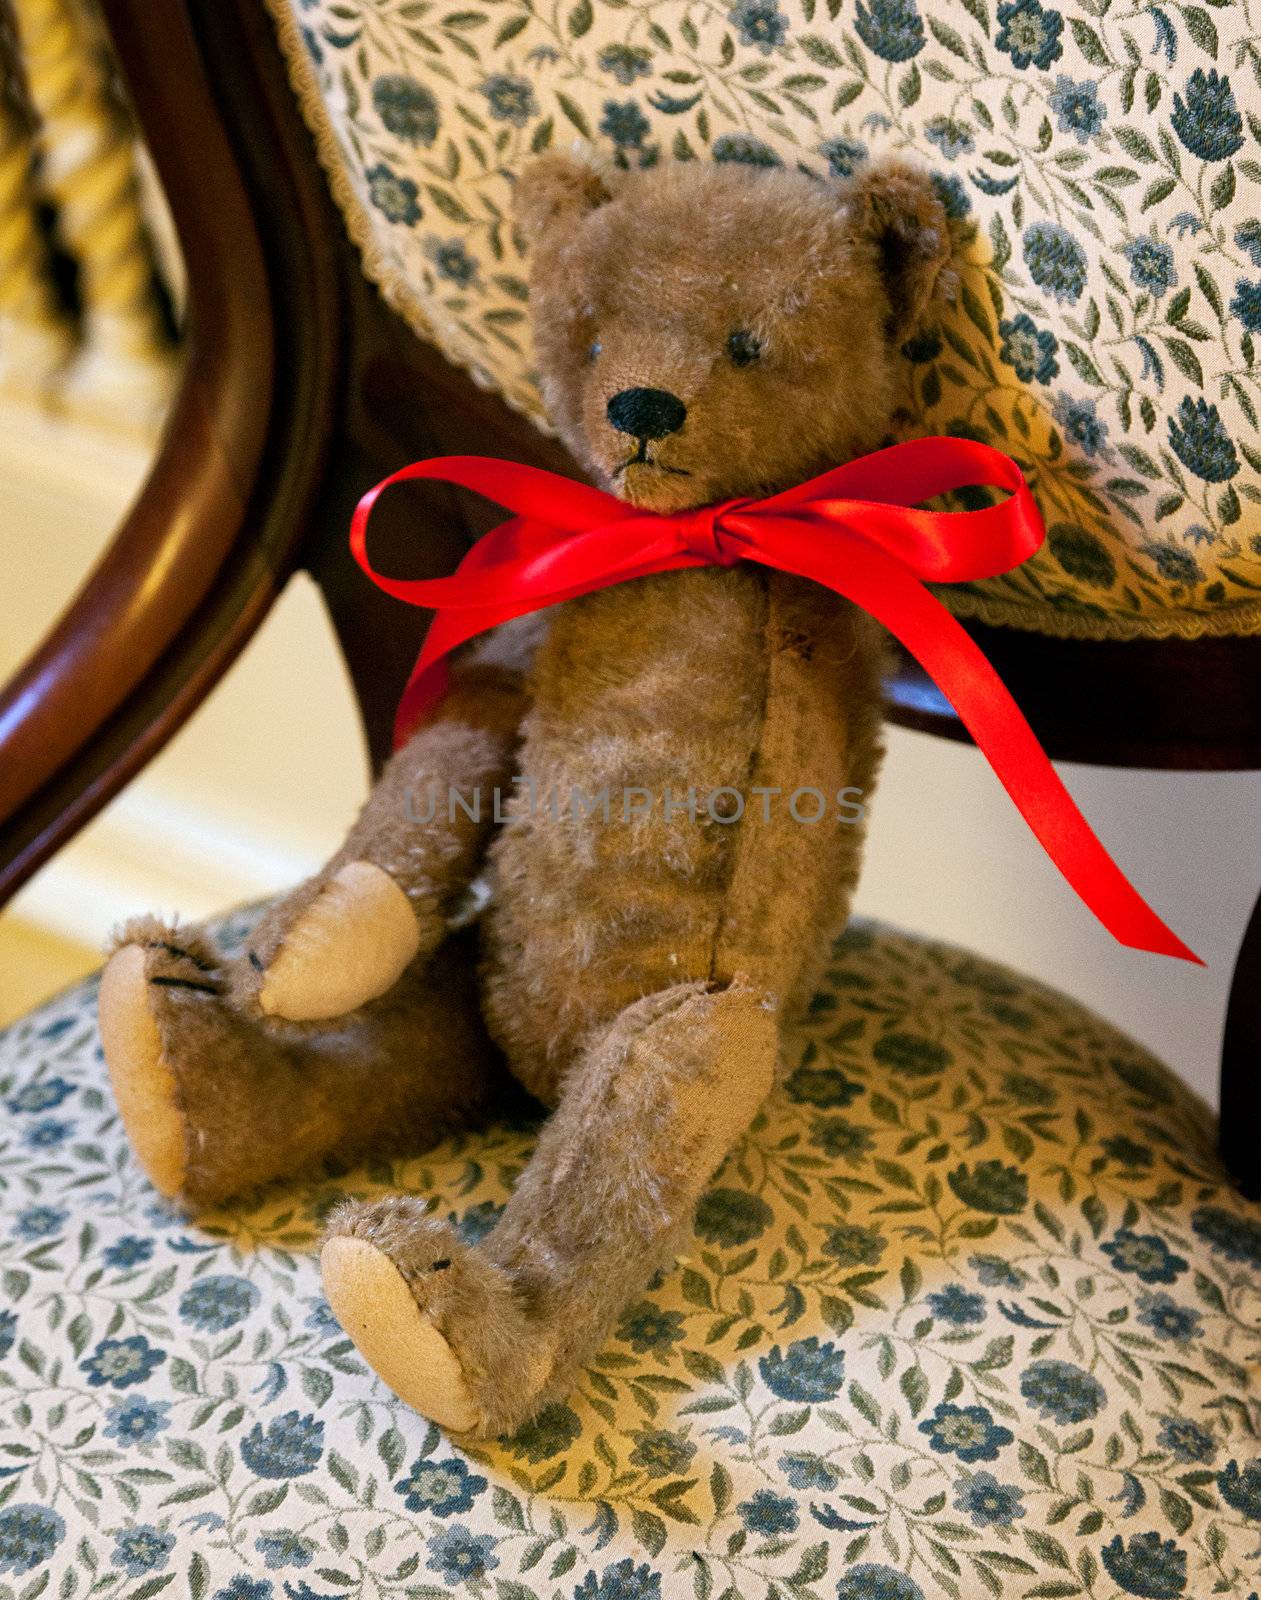 Old teddy bear on ornate seat with red ribbon around neck and missing one arm